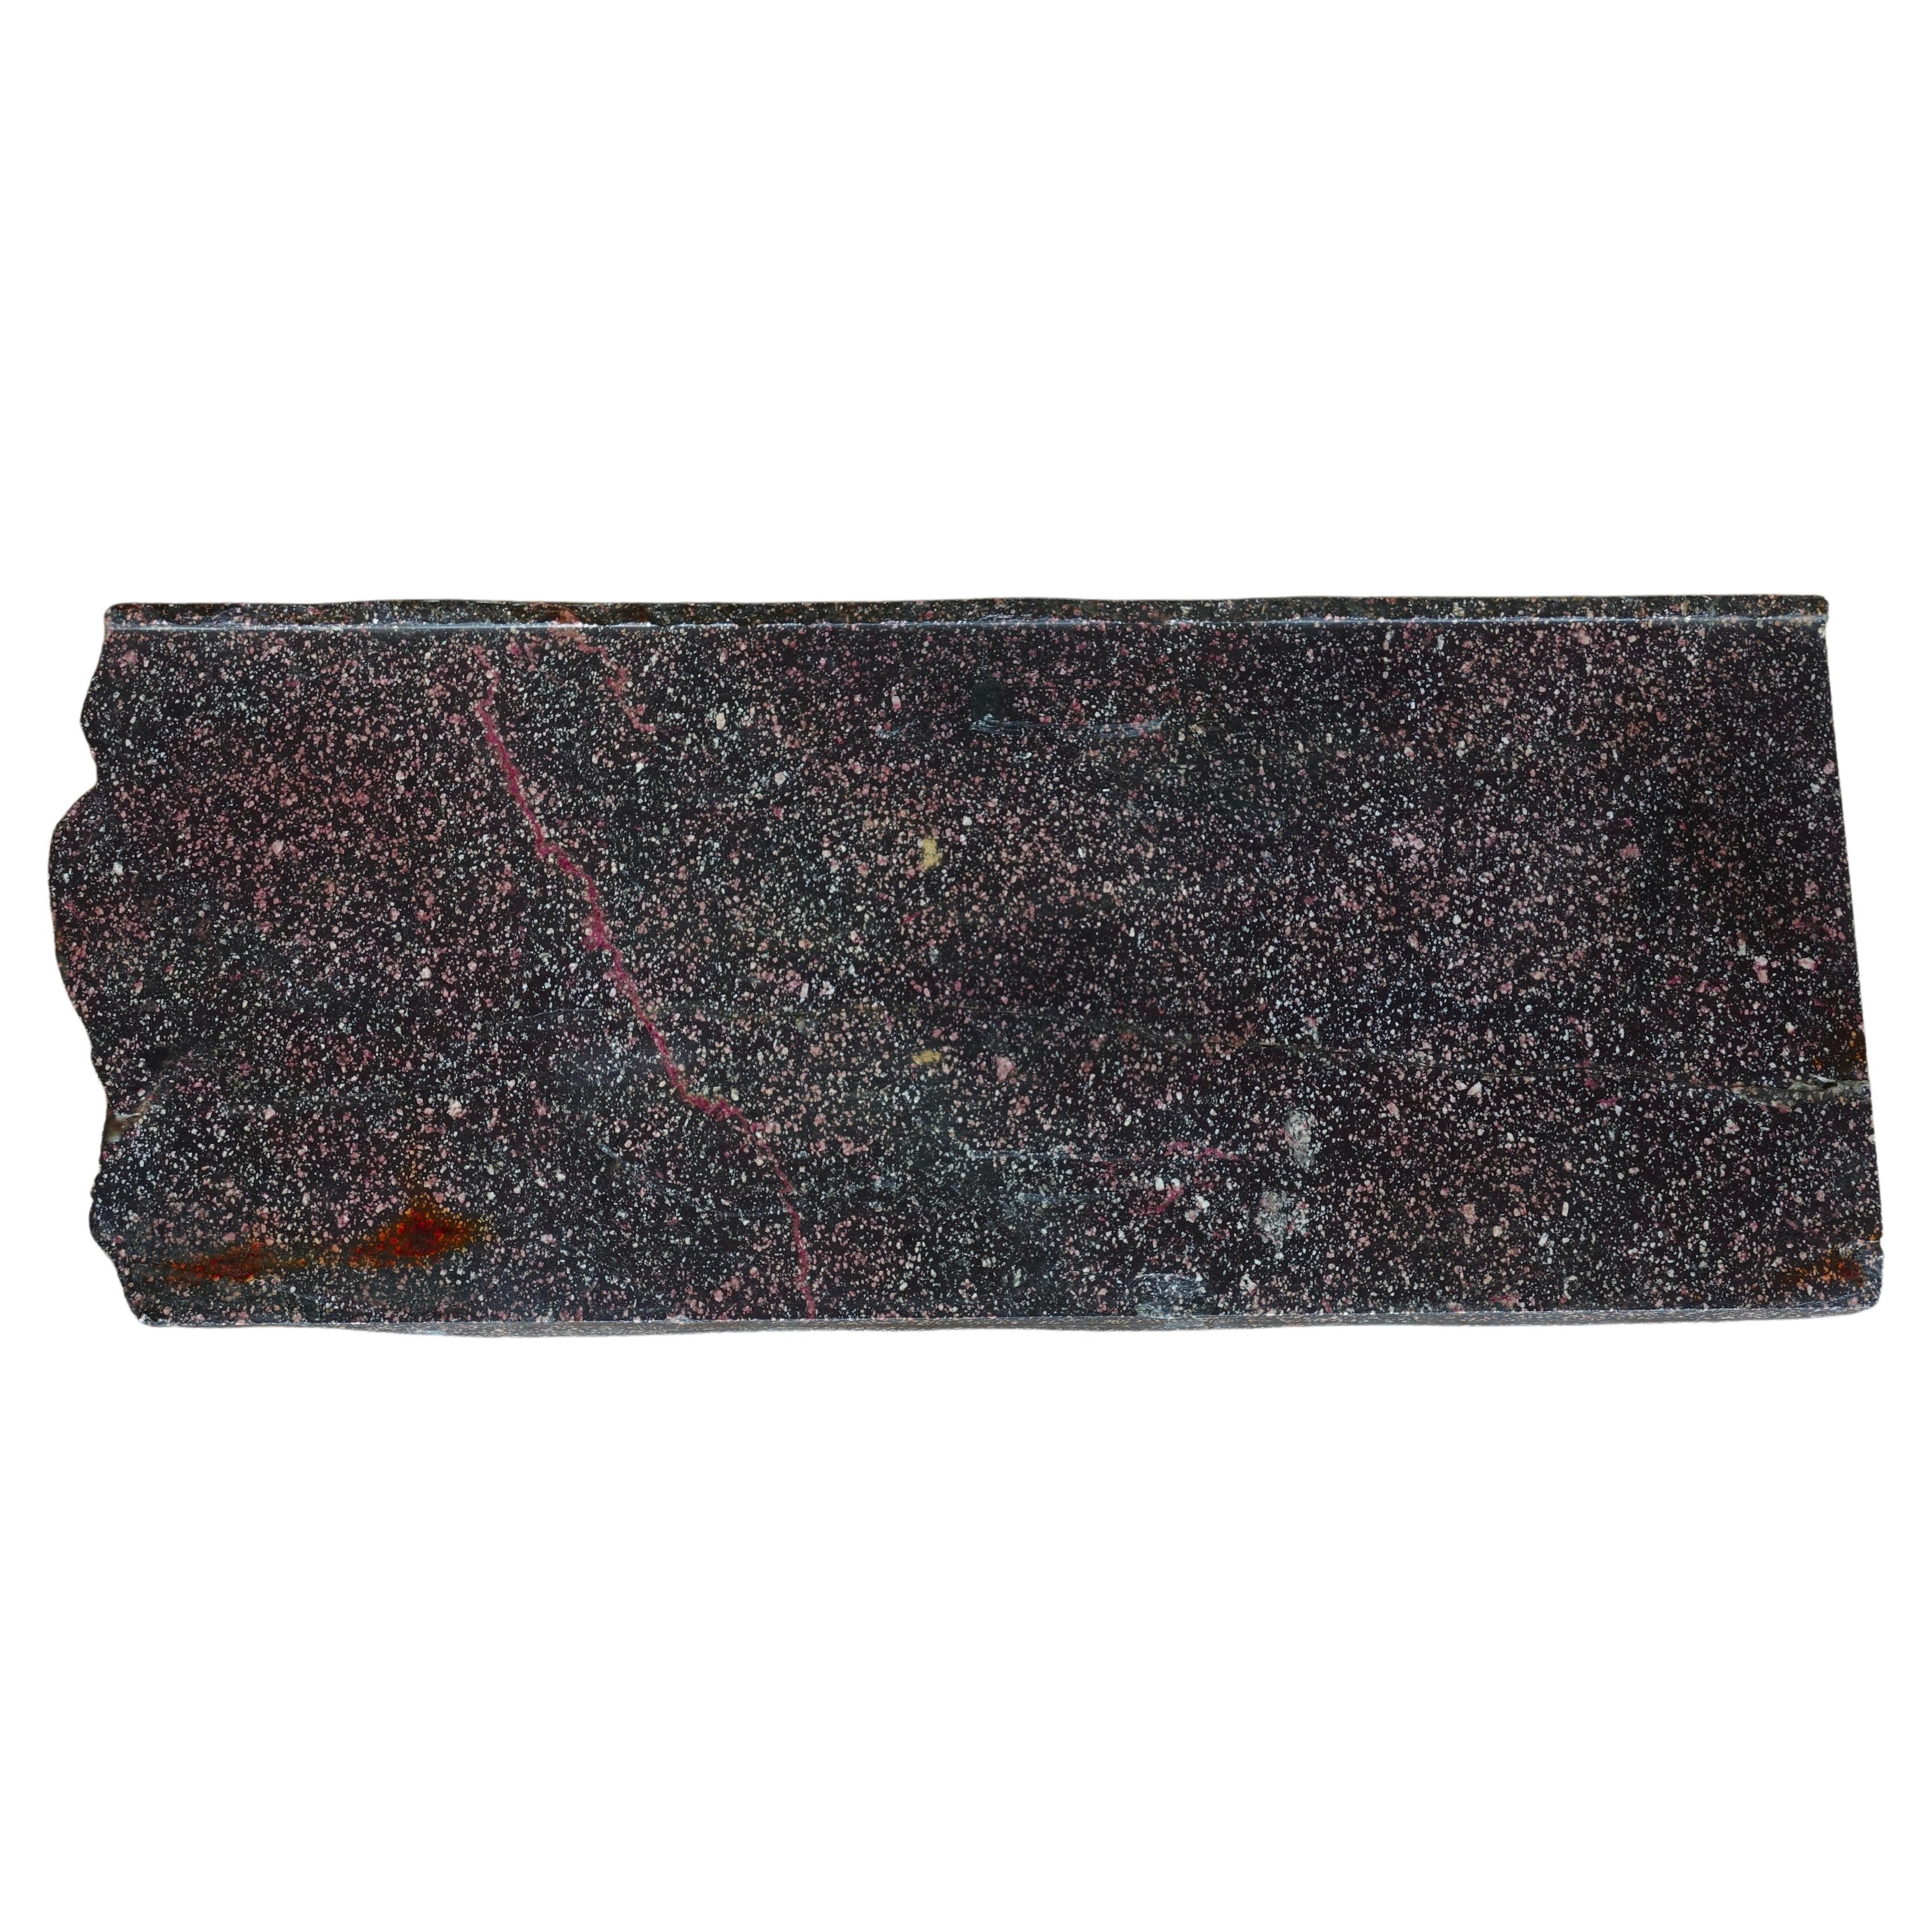 Imperial red Porphyry - Roman period For Sale